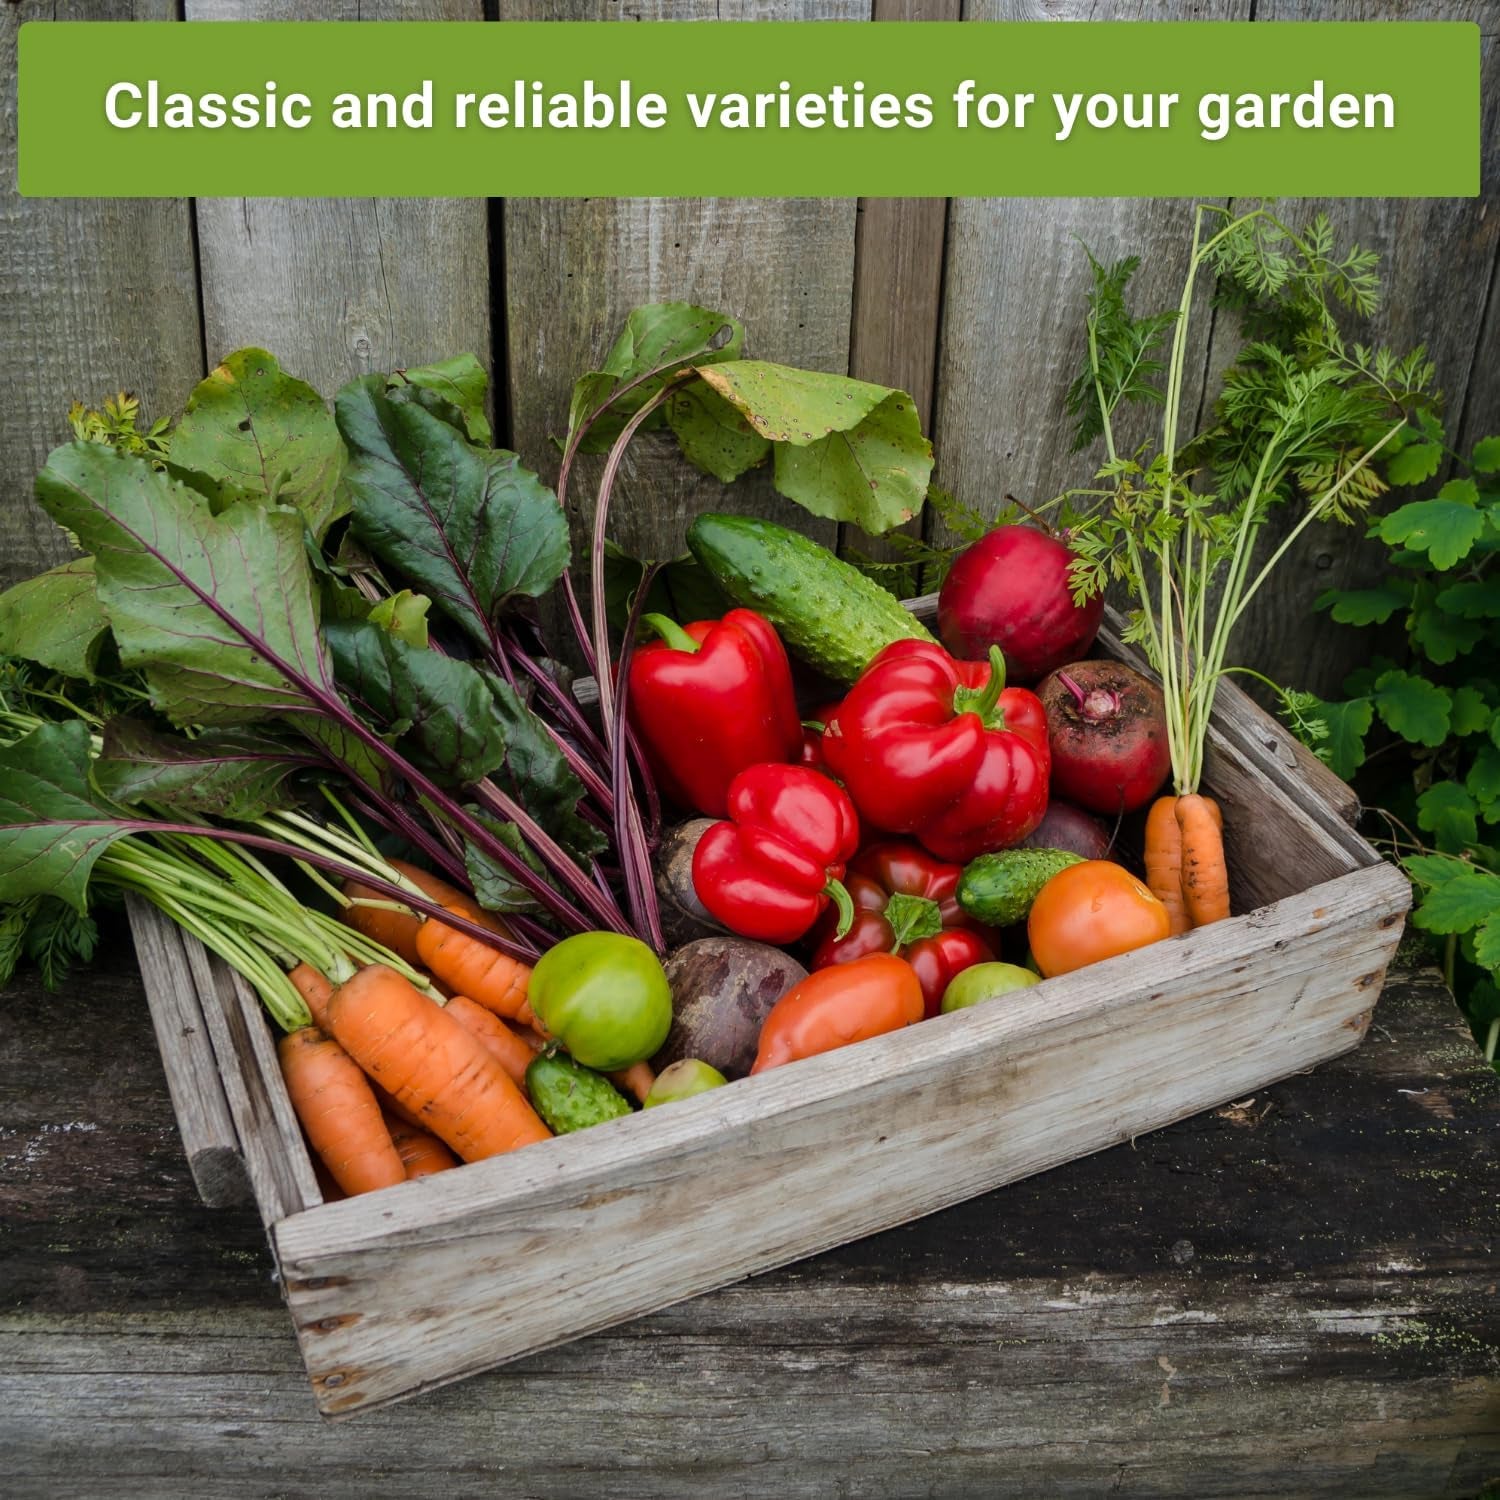 - Classic Vegetable Garden Seed Collection for Planting - Non-Gmo Heirloom Broccoli, Cabbage, Carrot, Cucumber, Eggplant, Kale, Lettuce, Tomato, Peppers, Zucchini, and More